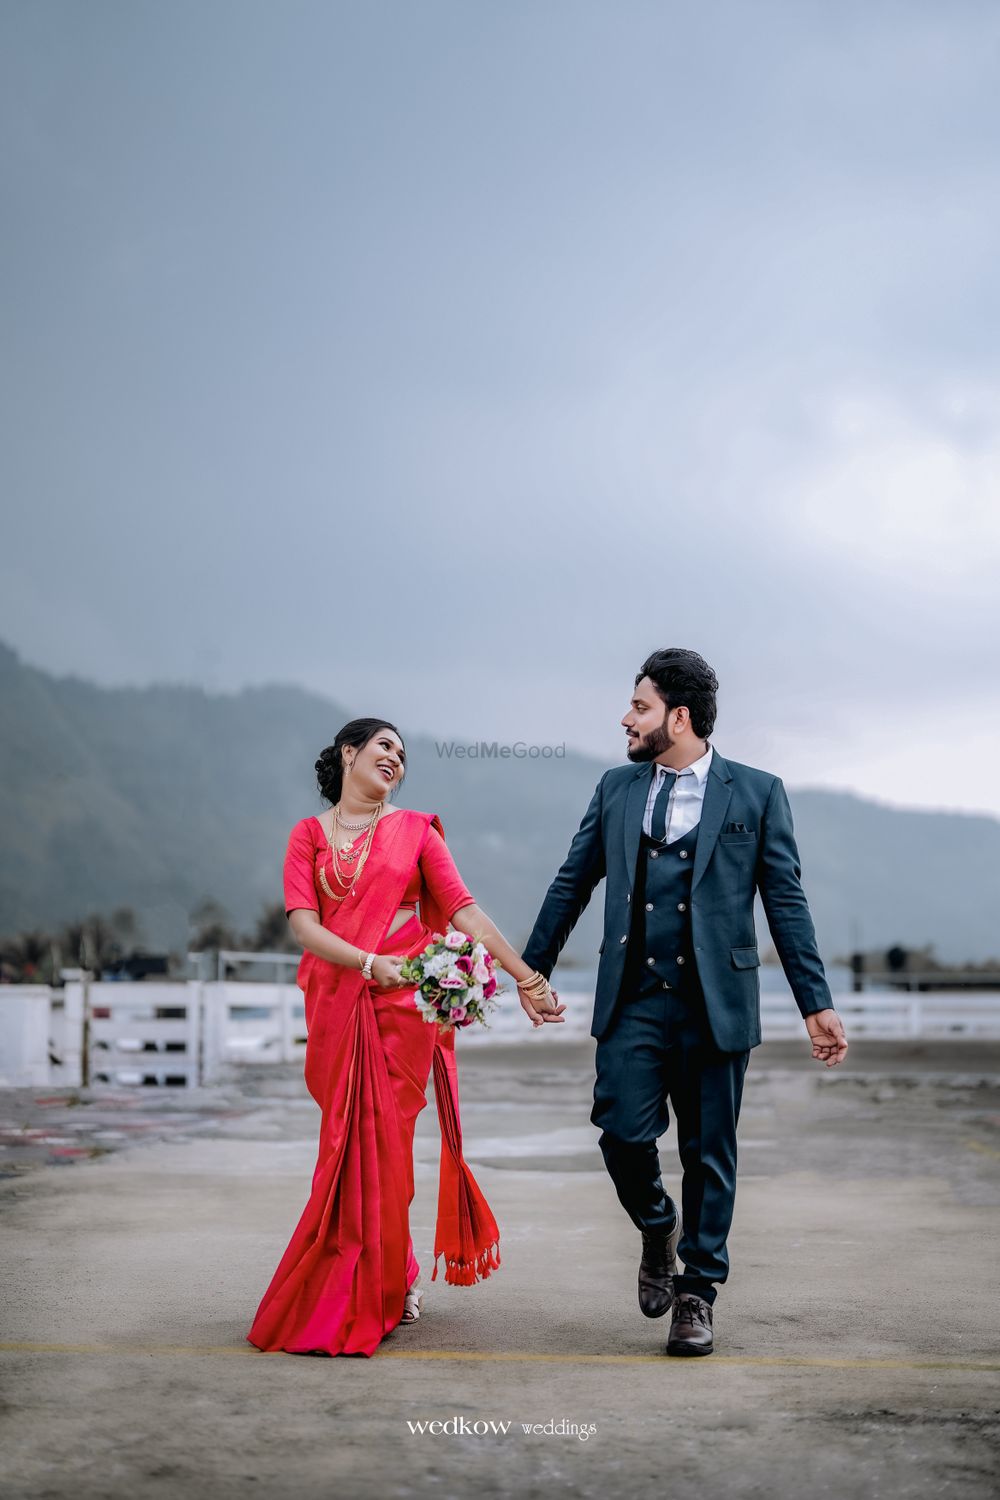 Photo From Dilna weds Anoop - By Wedkow Weddings